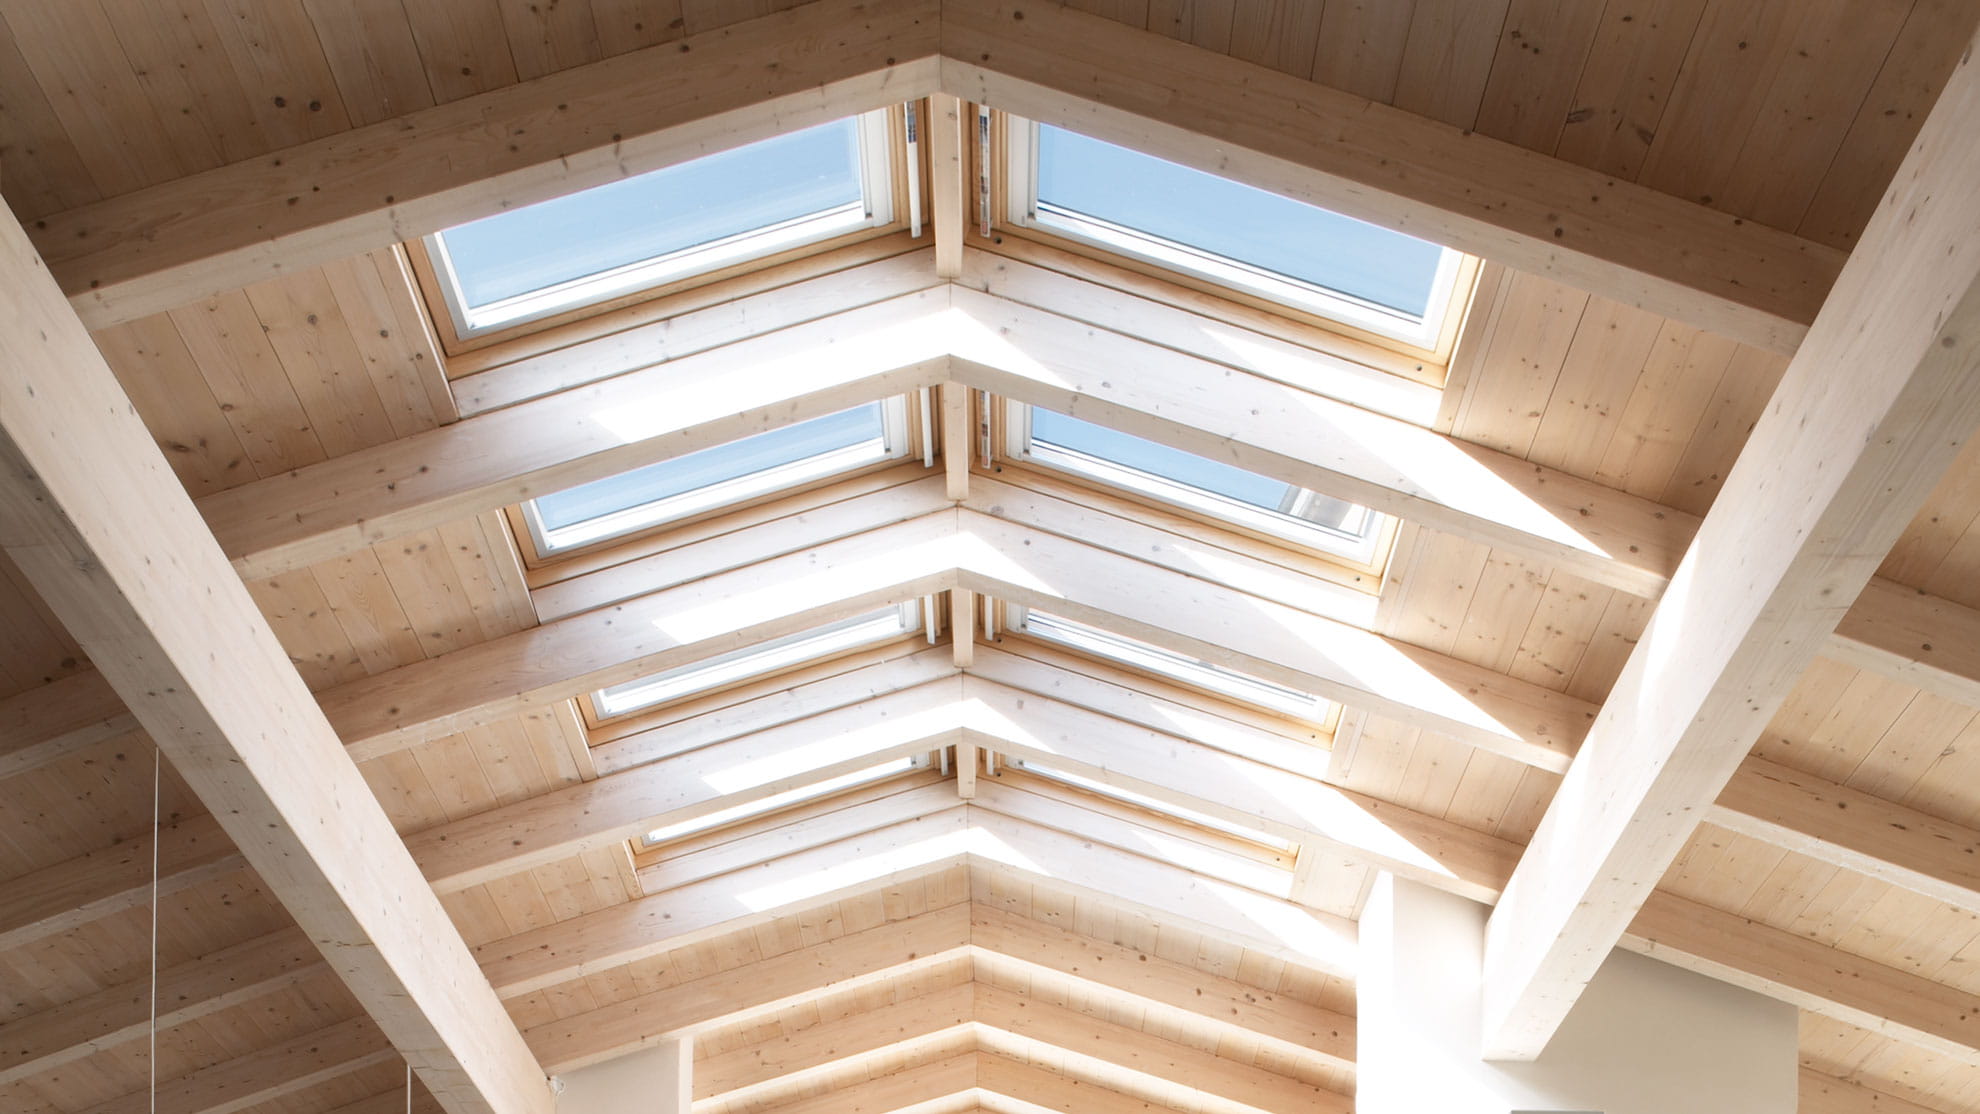 A view of a sloped roof with roof windows installed